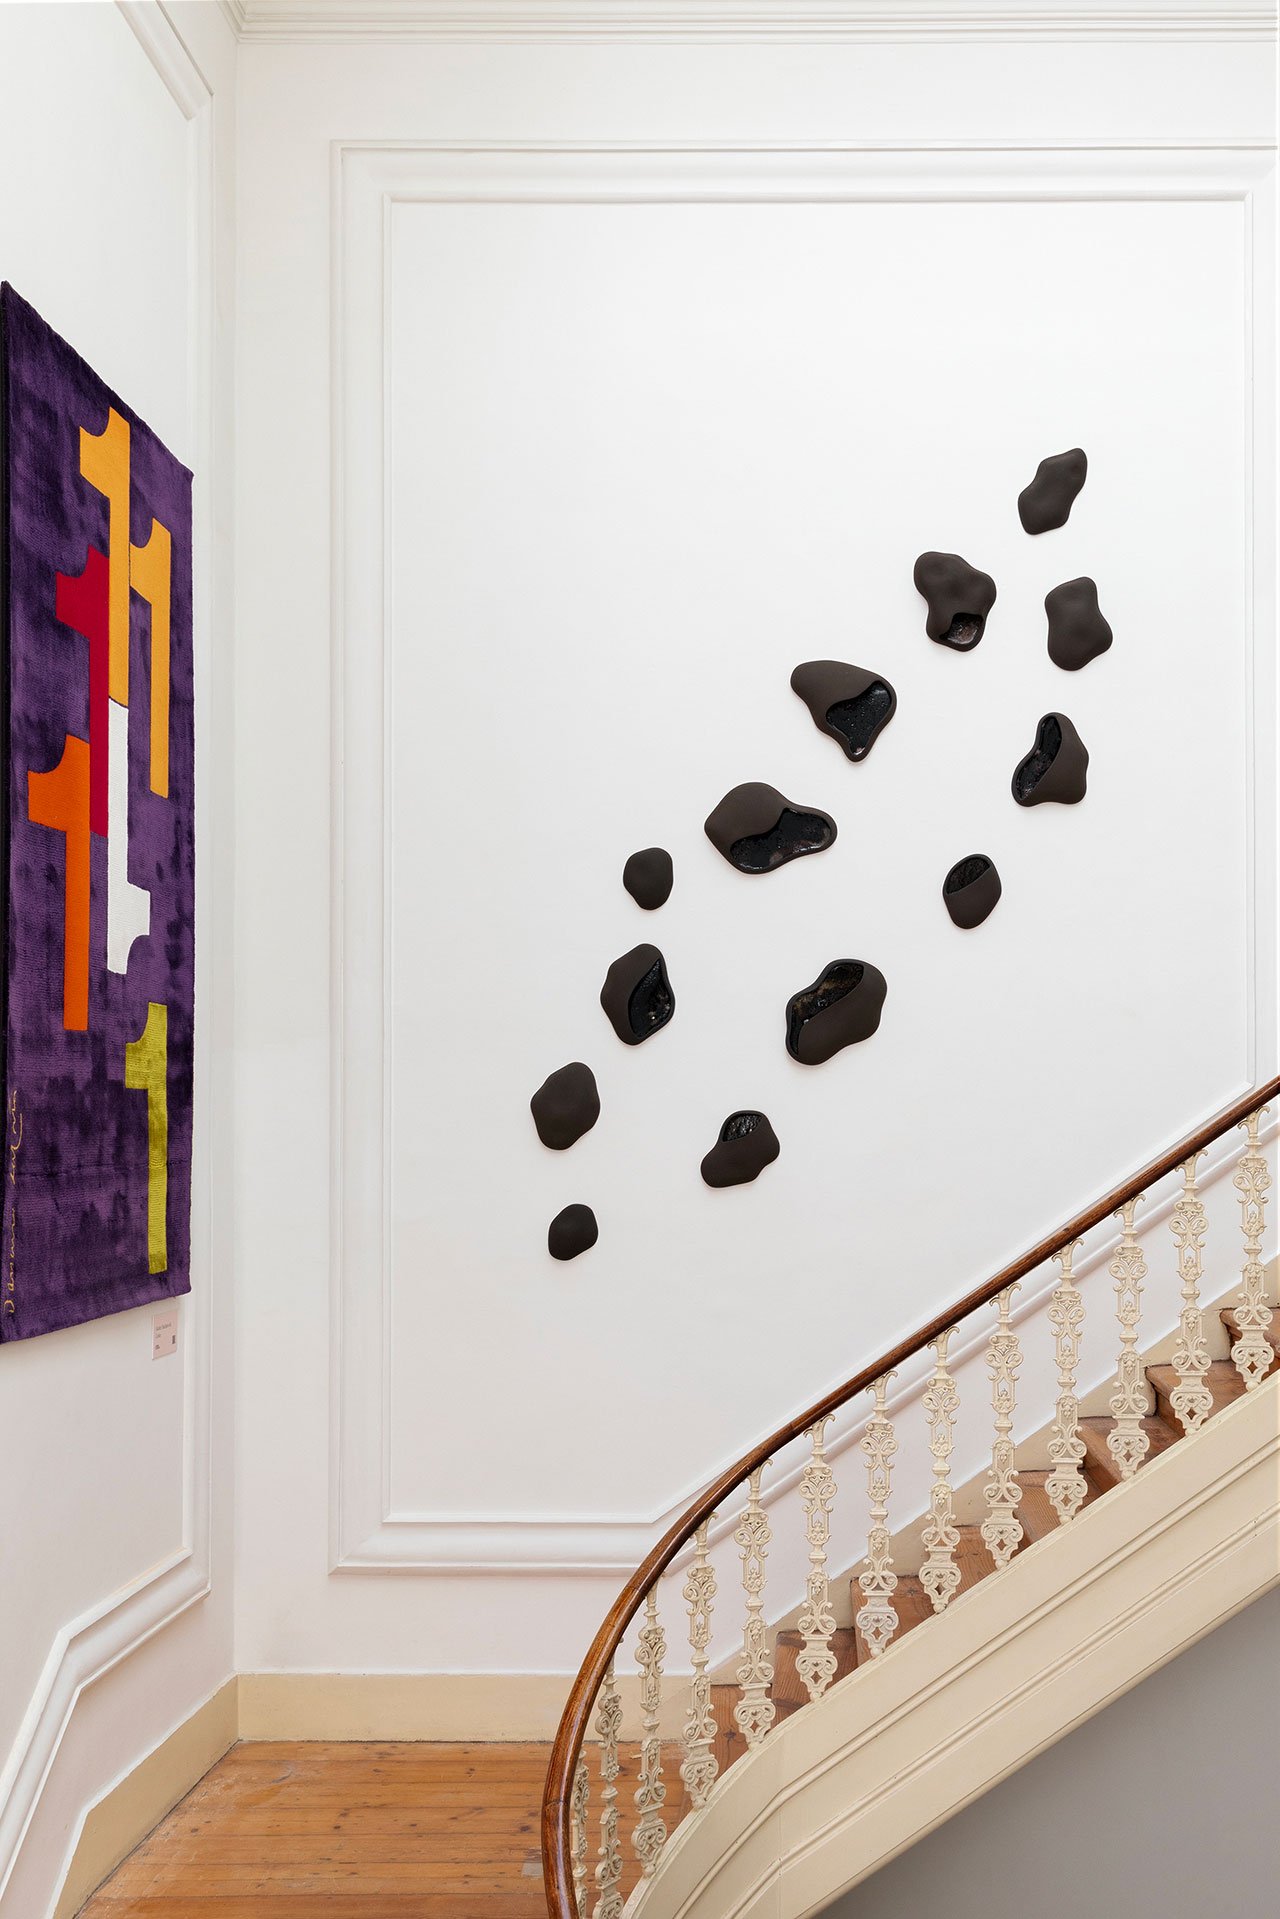 Installation view. Lisbon by Design, Palacete Gomes Freire, Lisbon. May 22- 26, 2024. Photography by Claudia Rocha.
Left: Atelier Daciano da Costa, re-edition graphic signage panels originally designed for Lisbon’s Hotel Penta. Right: Amande Haeghen, sculptural installation inspired by the archipels between Faro and Olhao in the south of Portugal